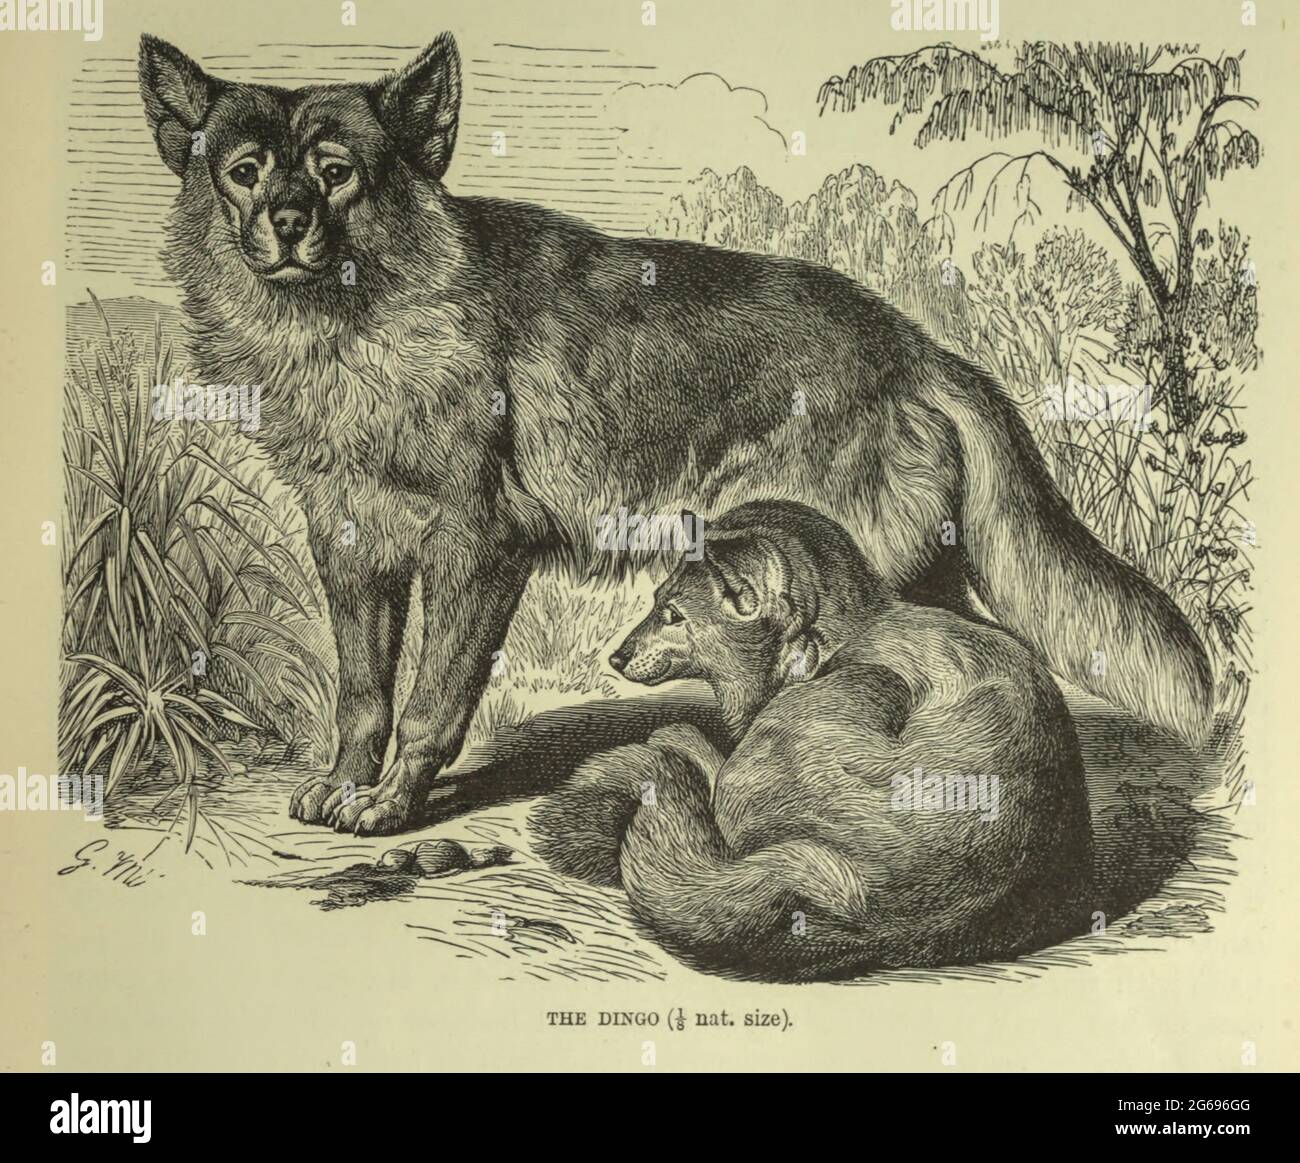 Dingo From the book ' Royal Natural History ' Volume 1 Edited by  Richard Lydekker, Published in London by Frederick Warne & Co in 1893-1894 Stock Photo